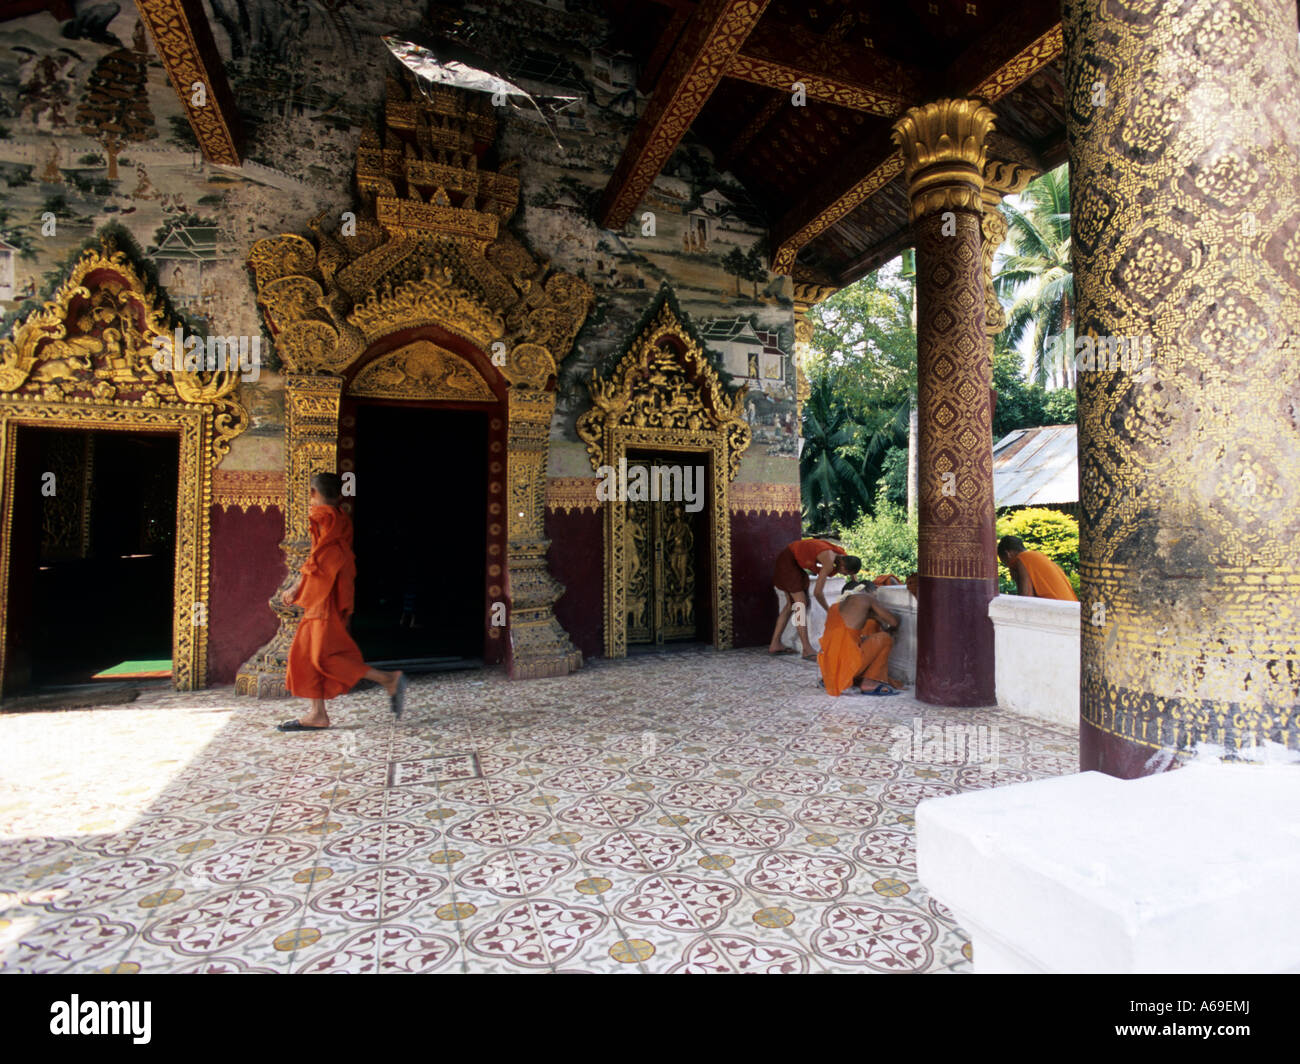 Novice buddhist monks cleaning the entrance of a temple. Luang Prabang, Laos. Stock Photo